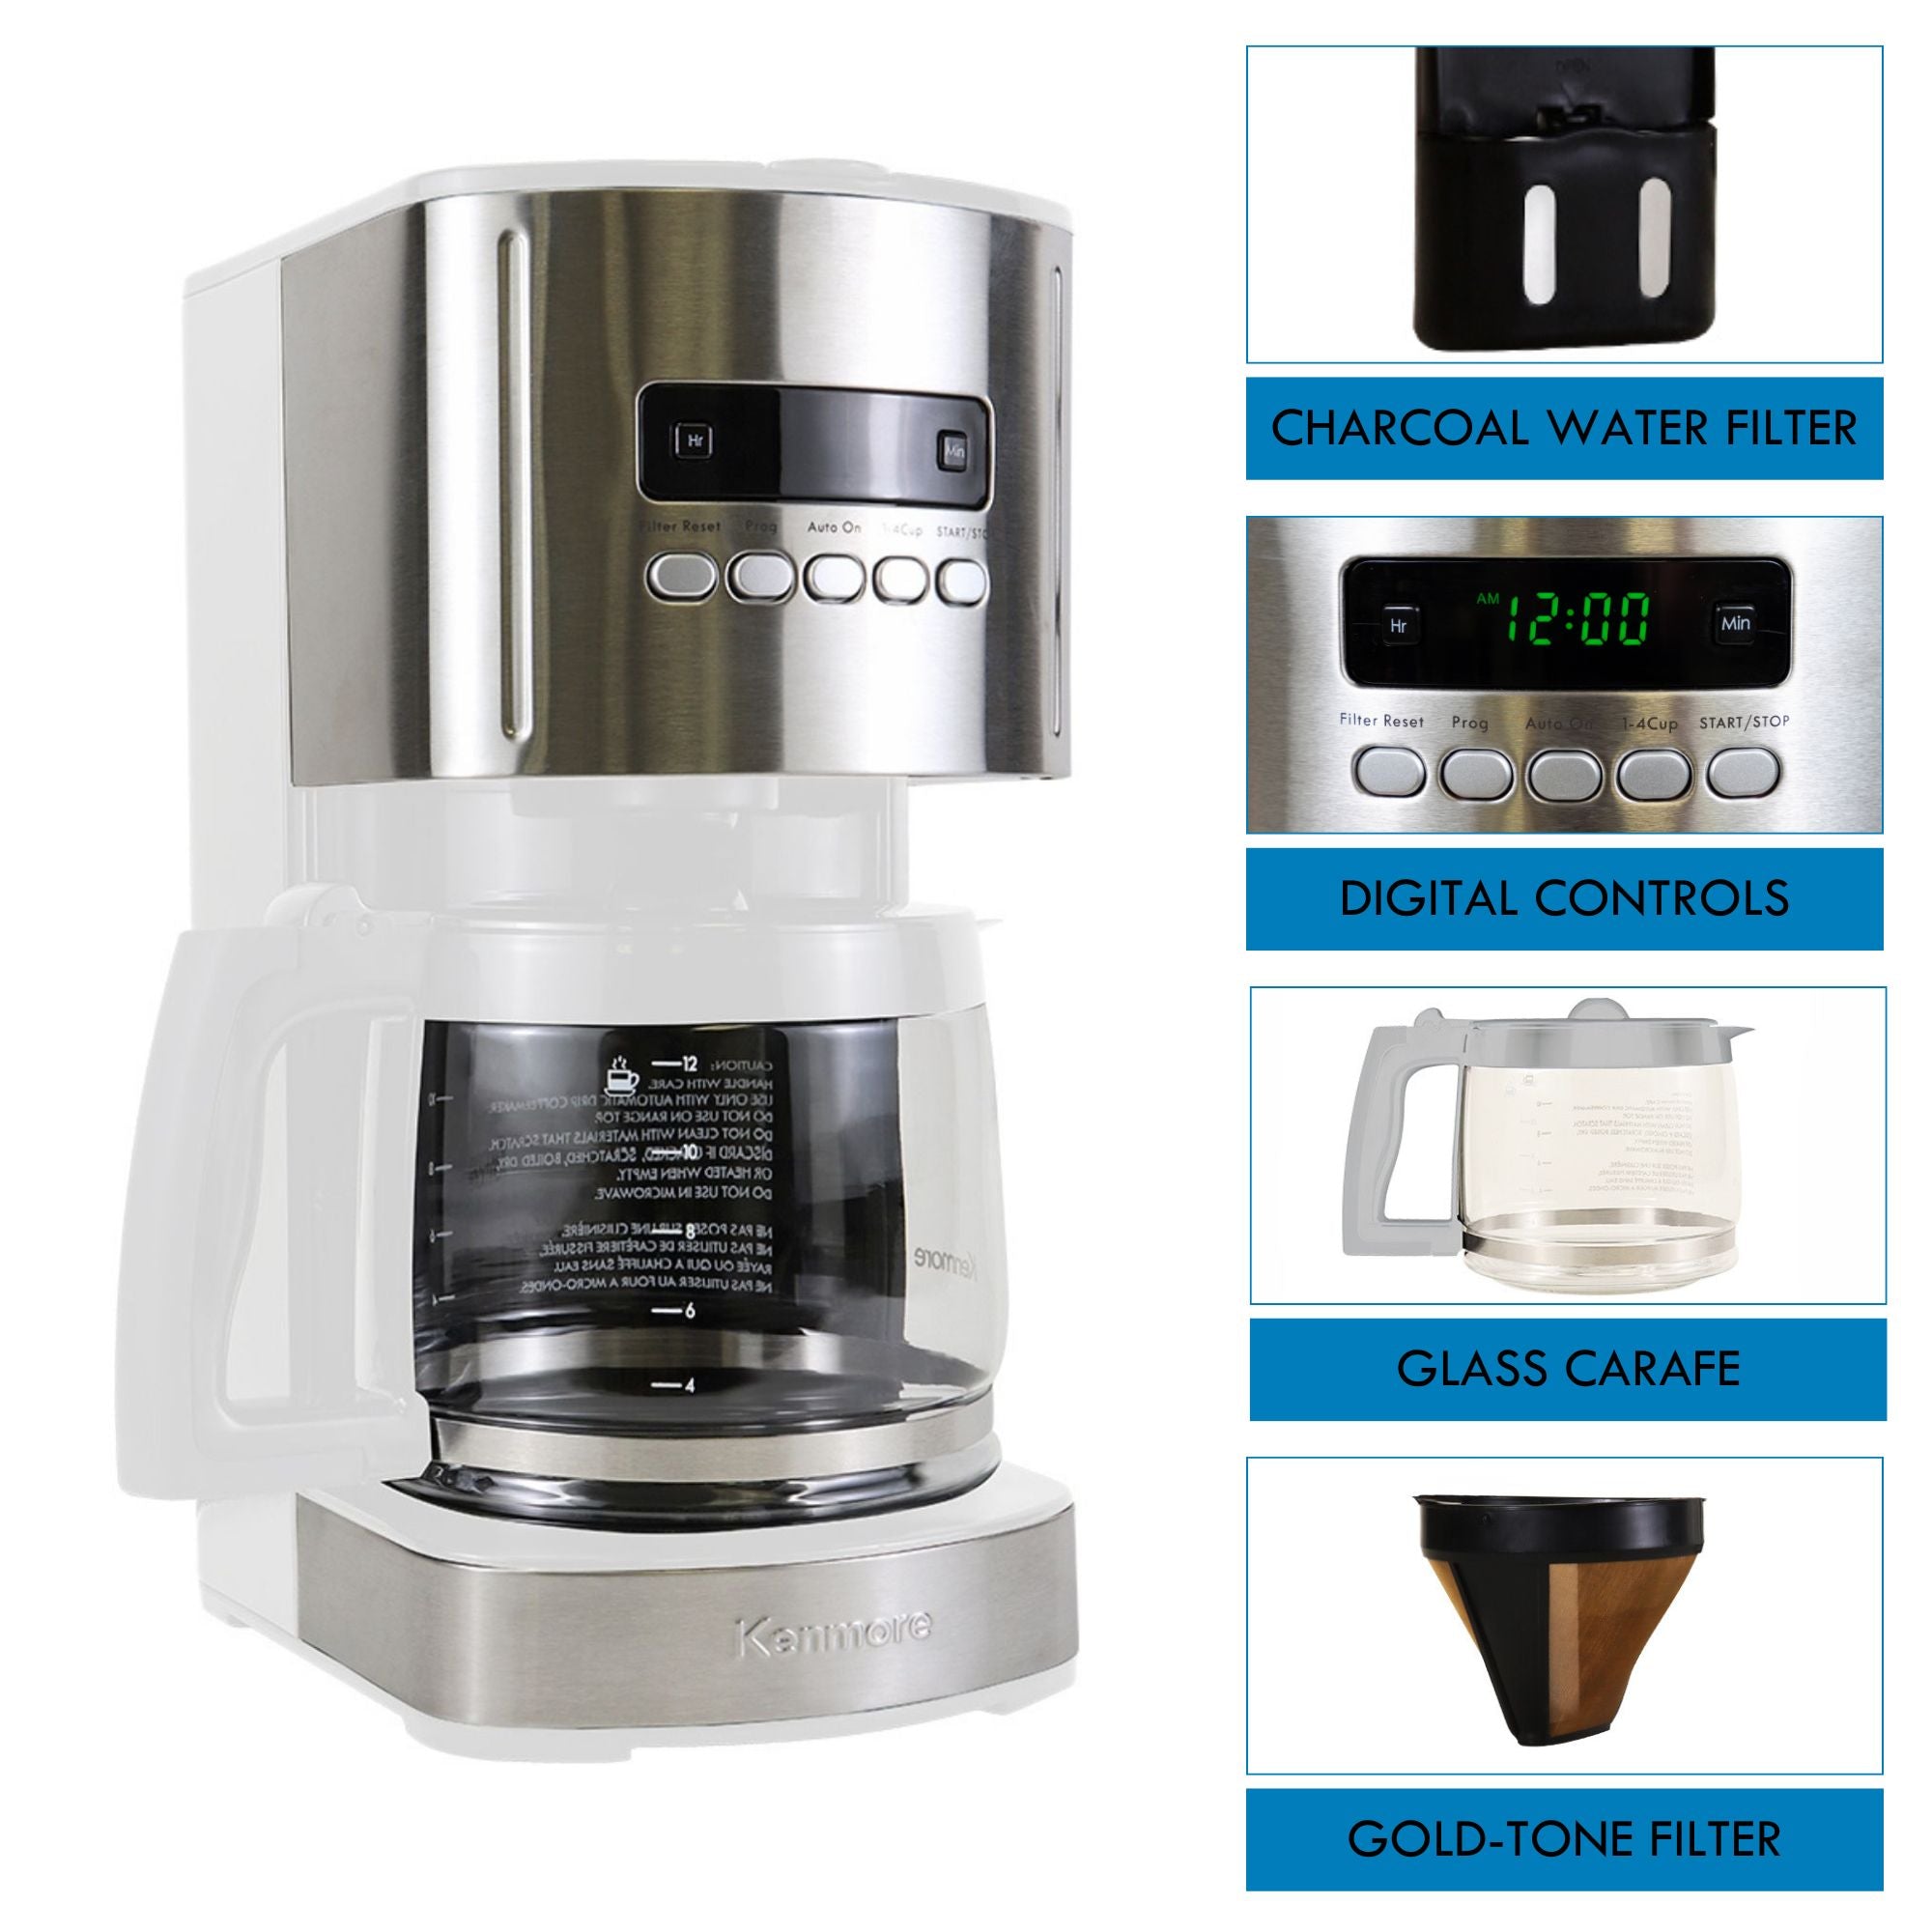 Kenmore 12 cup programmable coffeemaker on a white background on the left with four closeup images on the right of parts, labeled: water filter; digital controls; glass carafe; gold tone filter